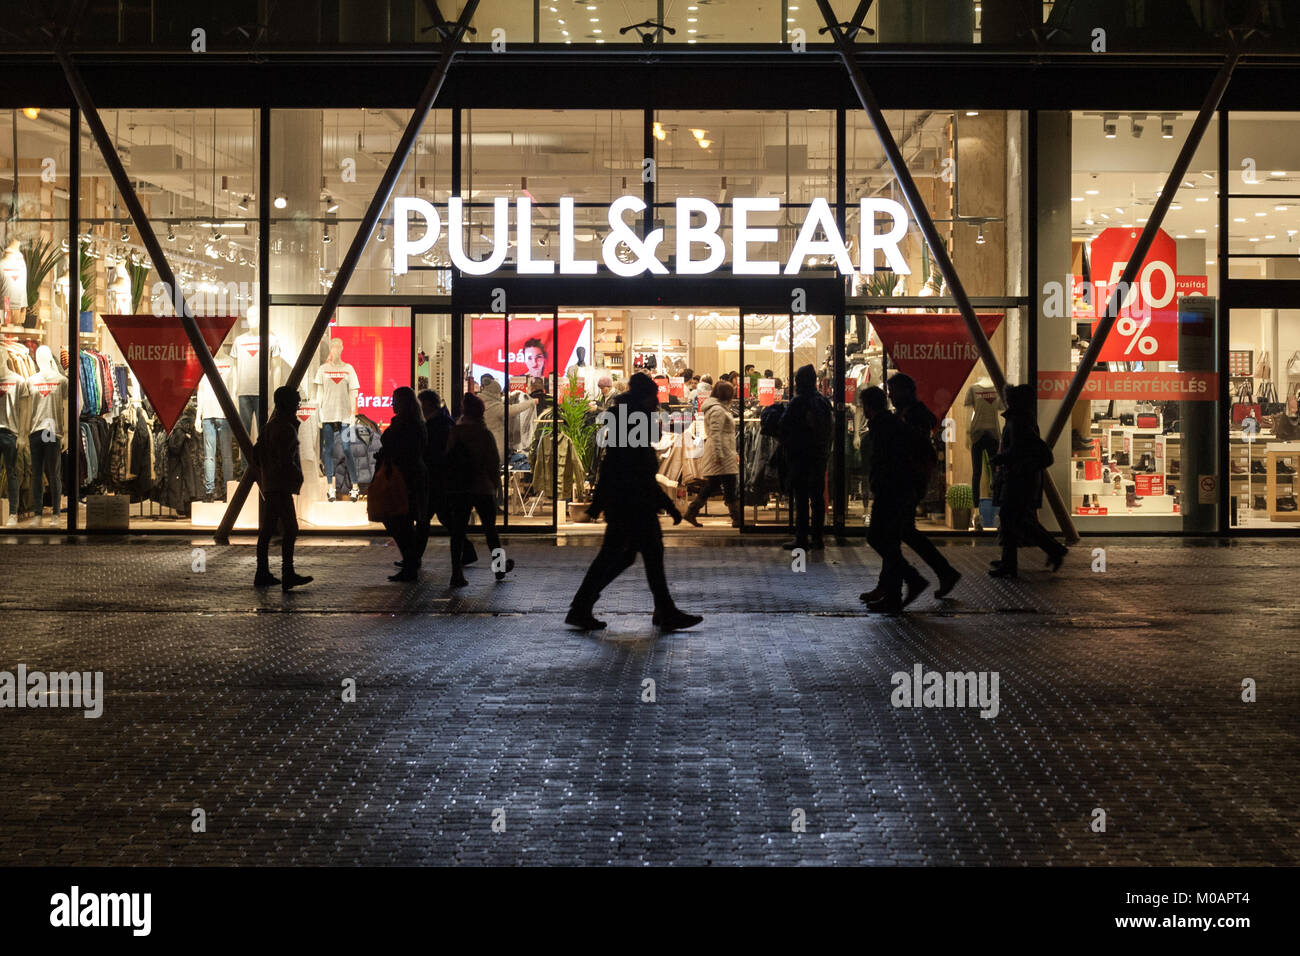 Budapest, HUNGARY Jan 19 2018: Pull & Bear shop front in Budapest. & Bear is a Spanish clothing and accessories based Galicia Stock - Alamy